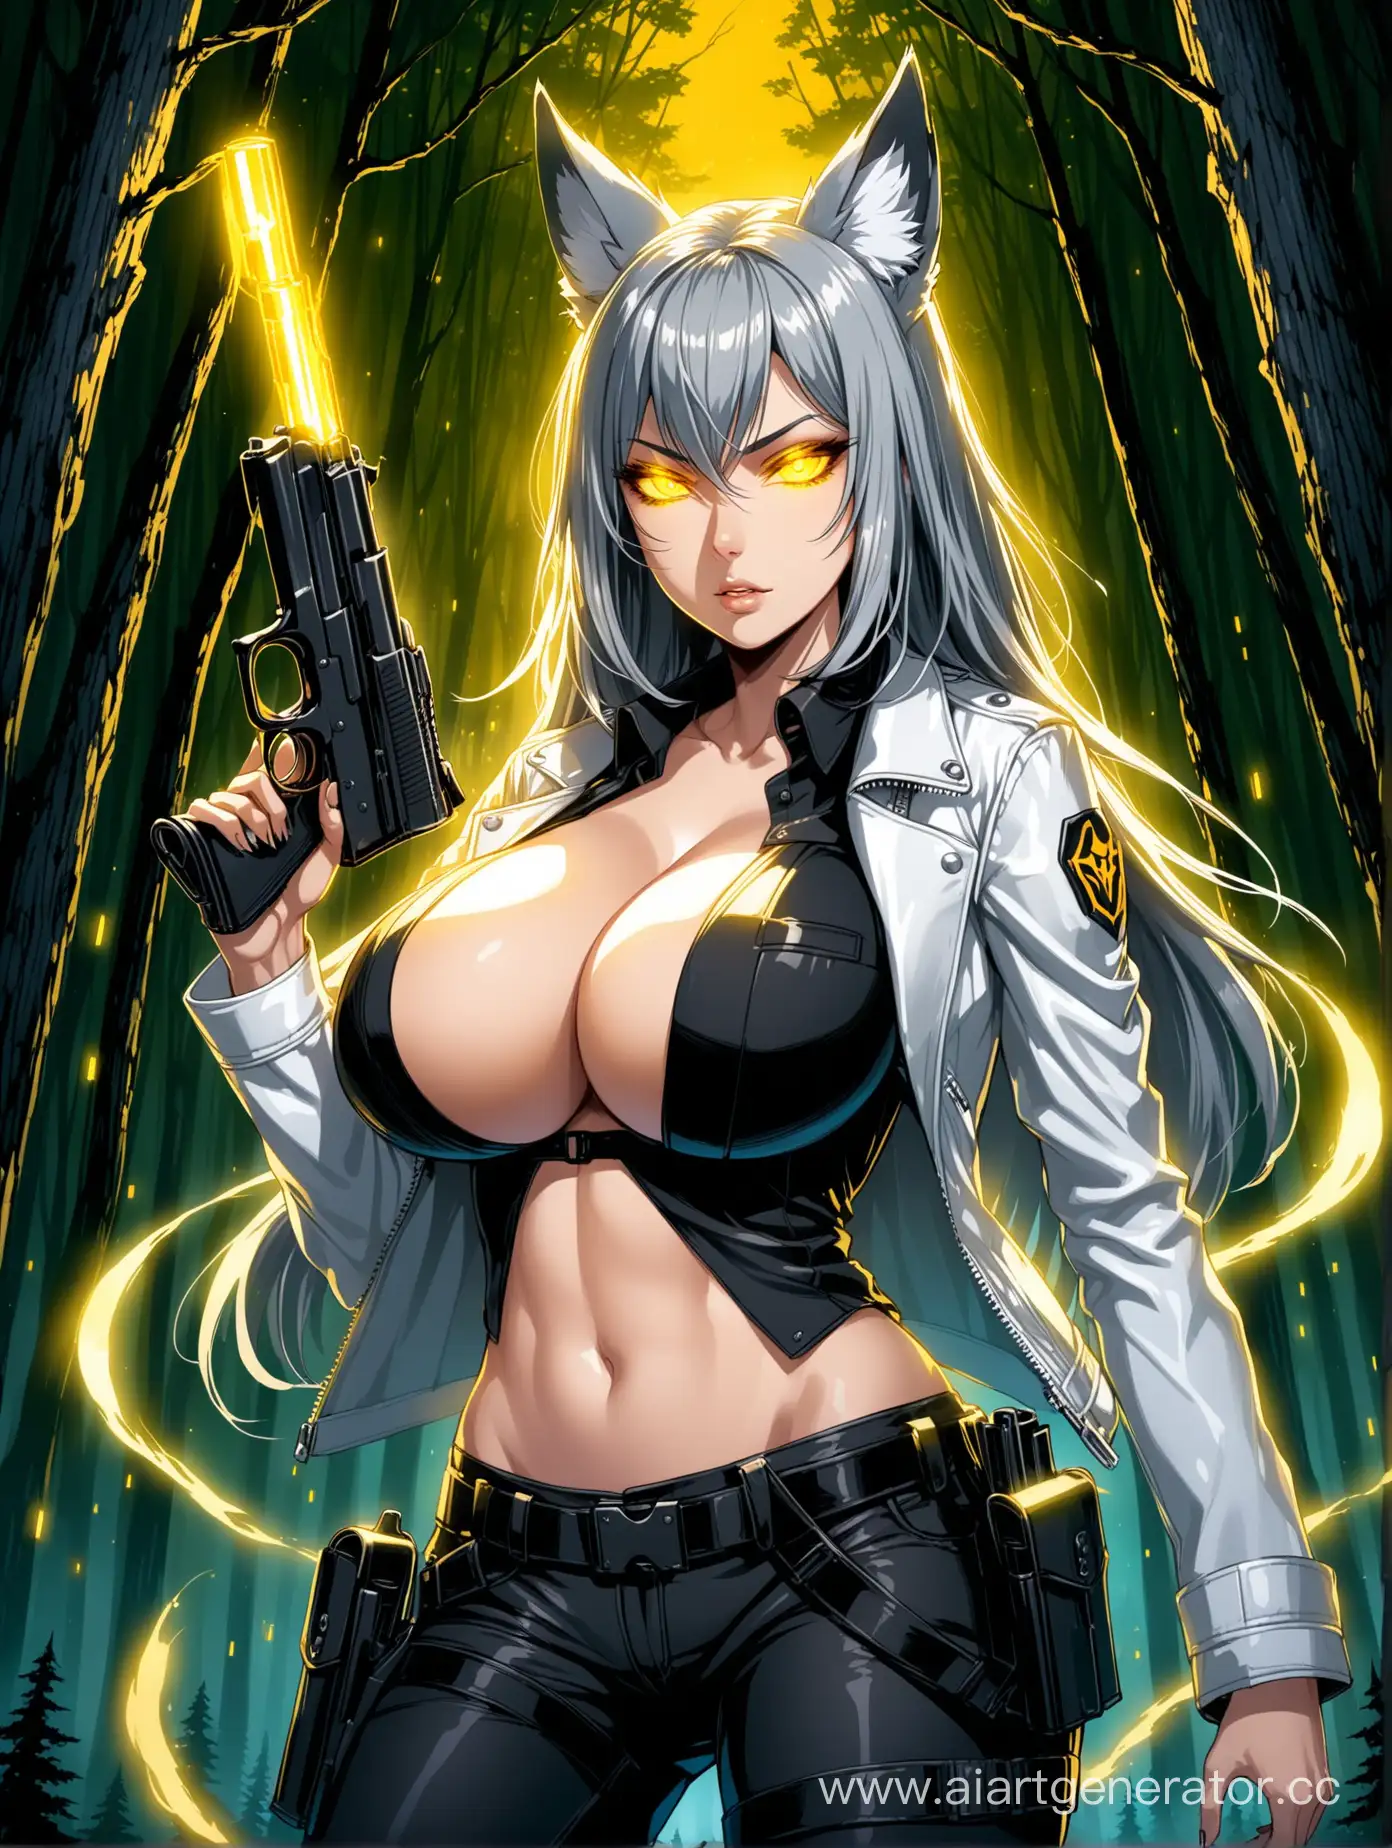 grey hair, fox ears, long hair, yellow glowing eyes, smoky eyes, slim face, angular and fierce facial features, white girl, mid 20s, huge breasts, perfect breasts, black shirt, white leather jacket, slim body, black pants, double holster with 2 guns, night forest